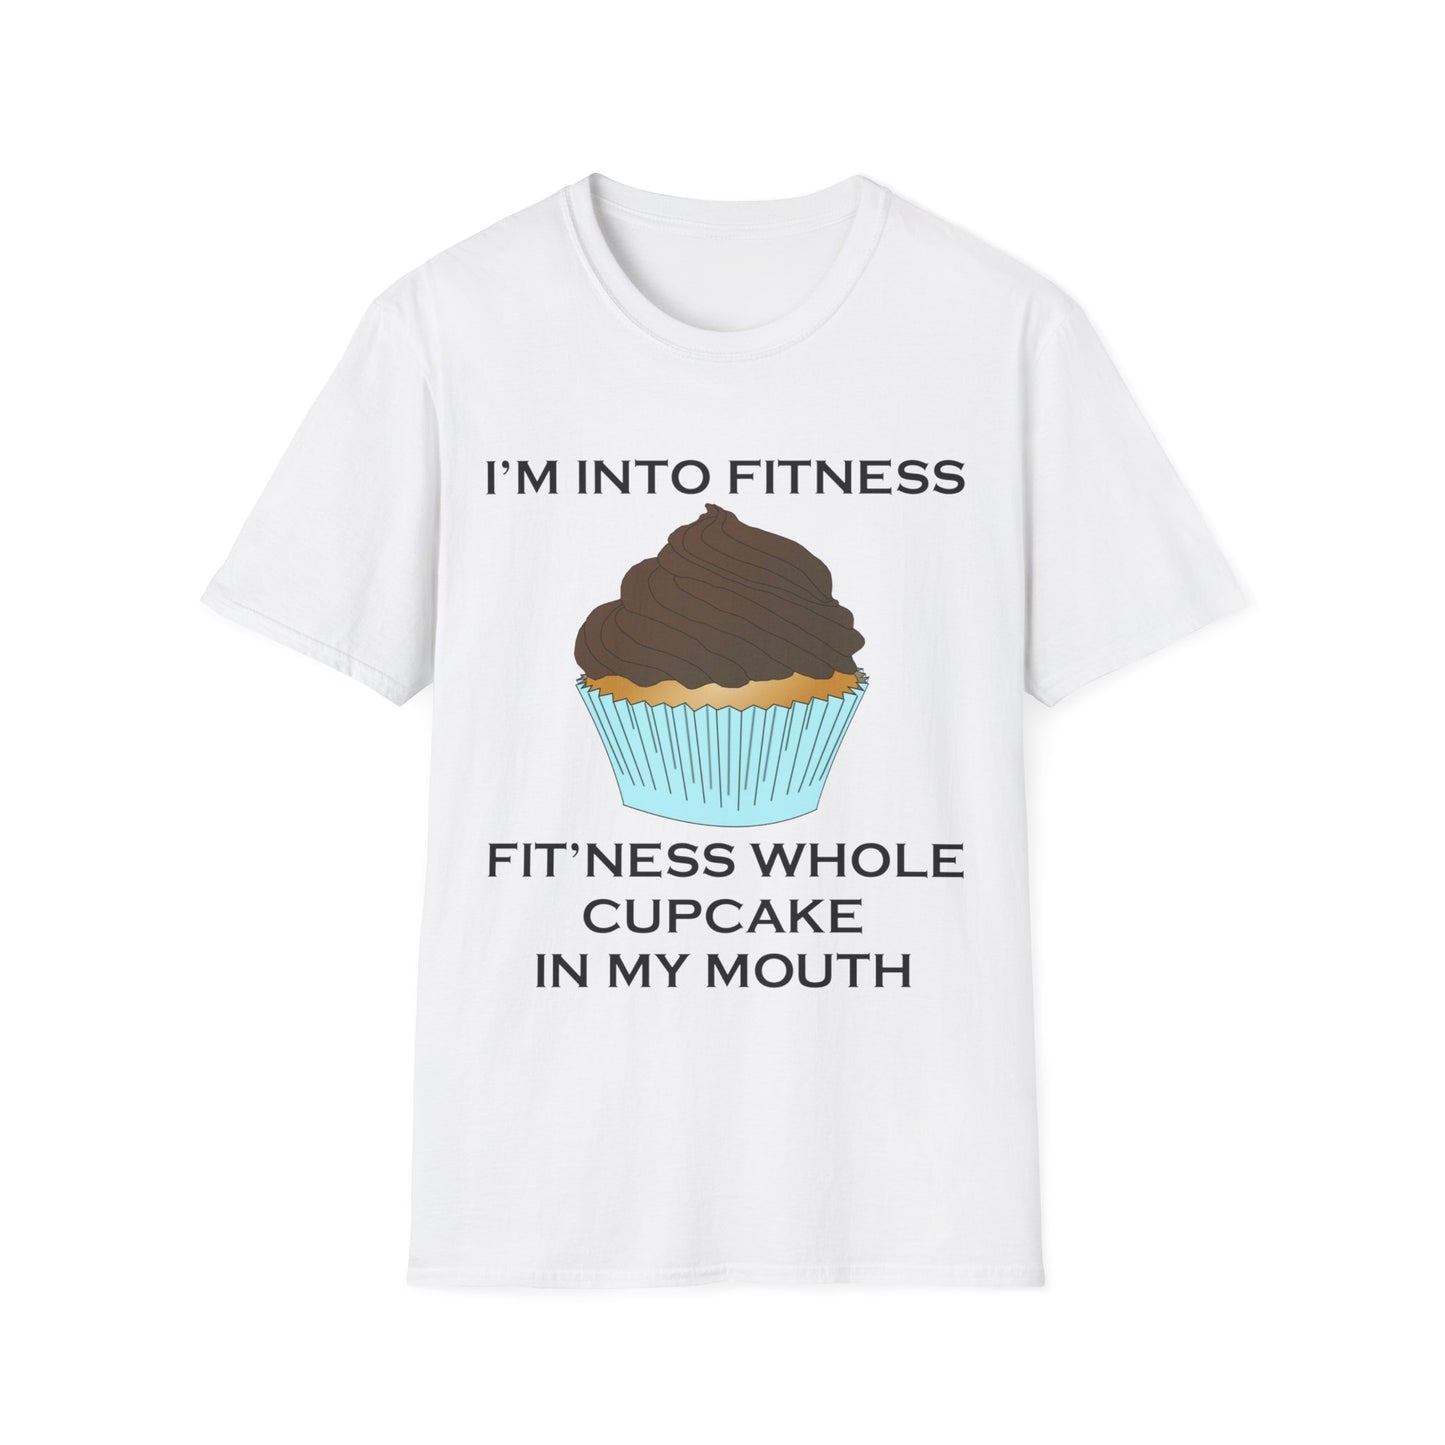 A white t-shirt with a design of a chocolate cupcake and the funny quote: I'm Into Fitness. Fit'ness Whole Cupcake Into My Mouth